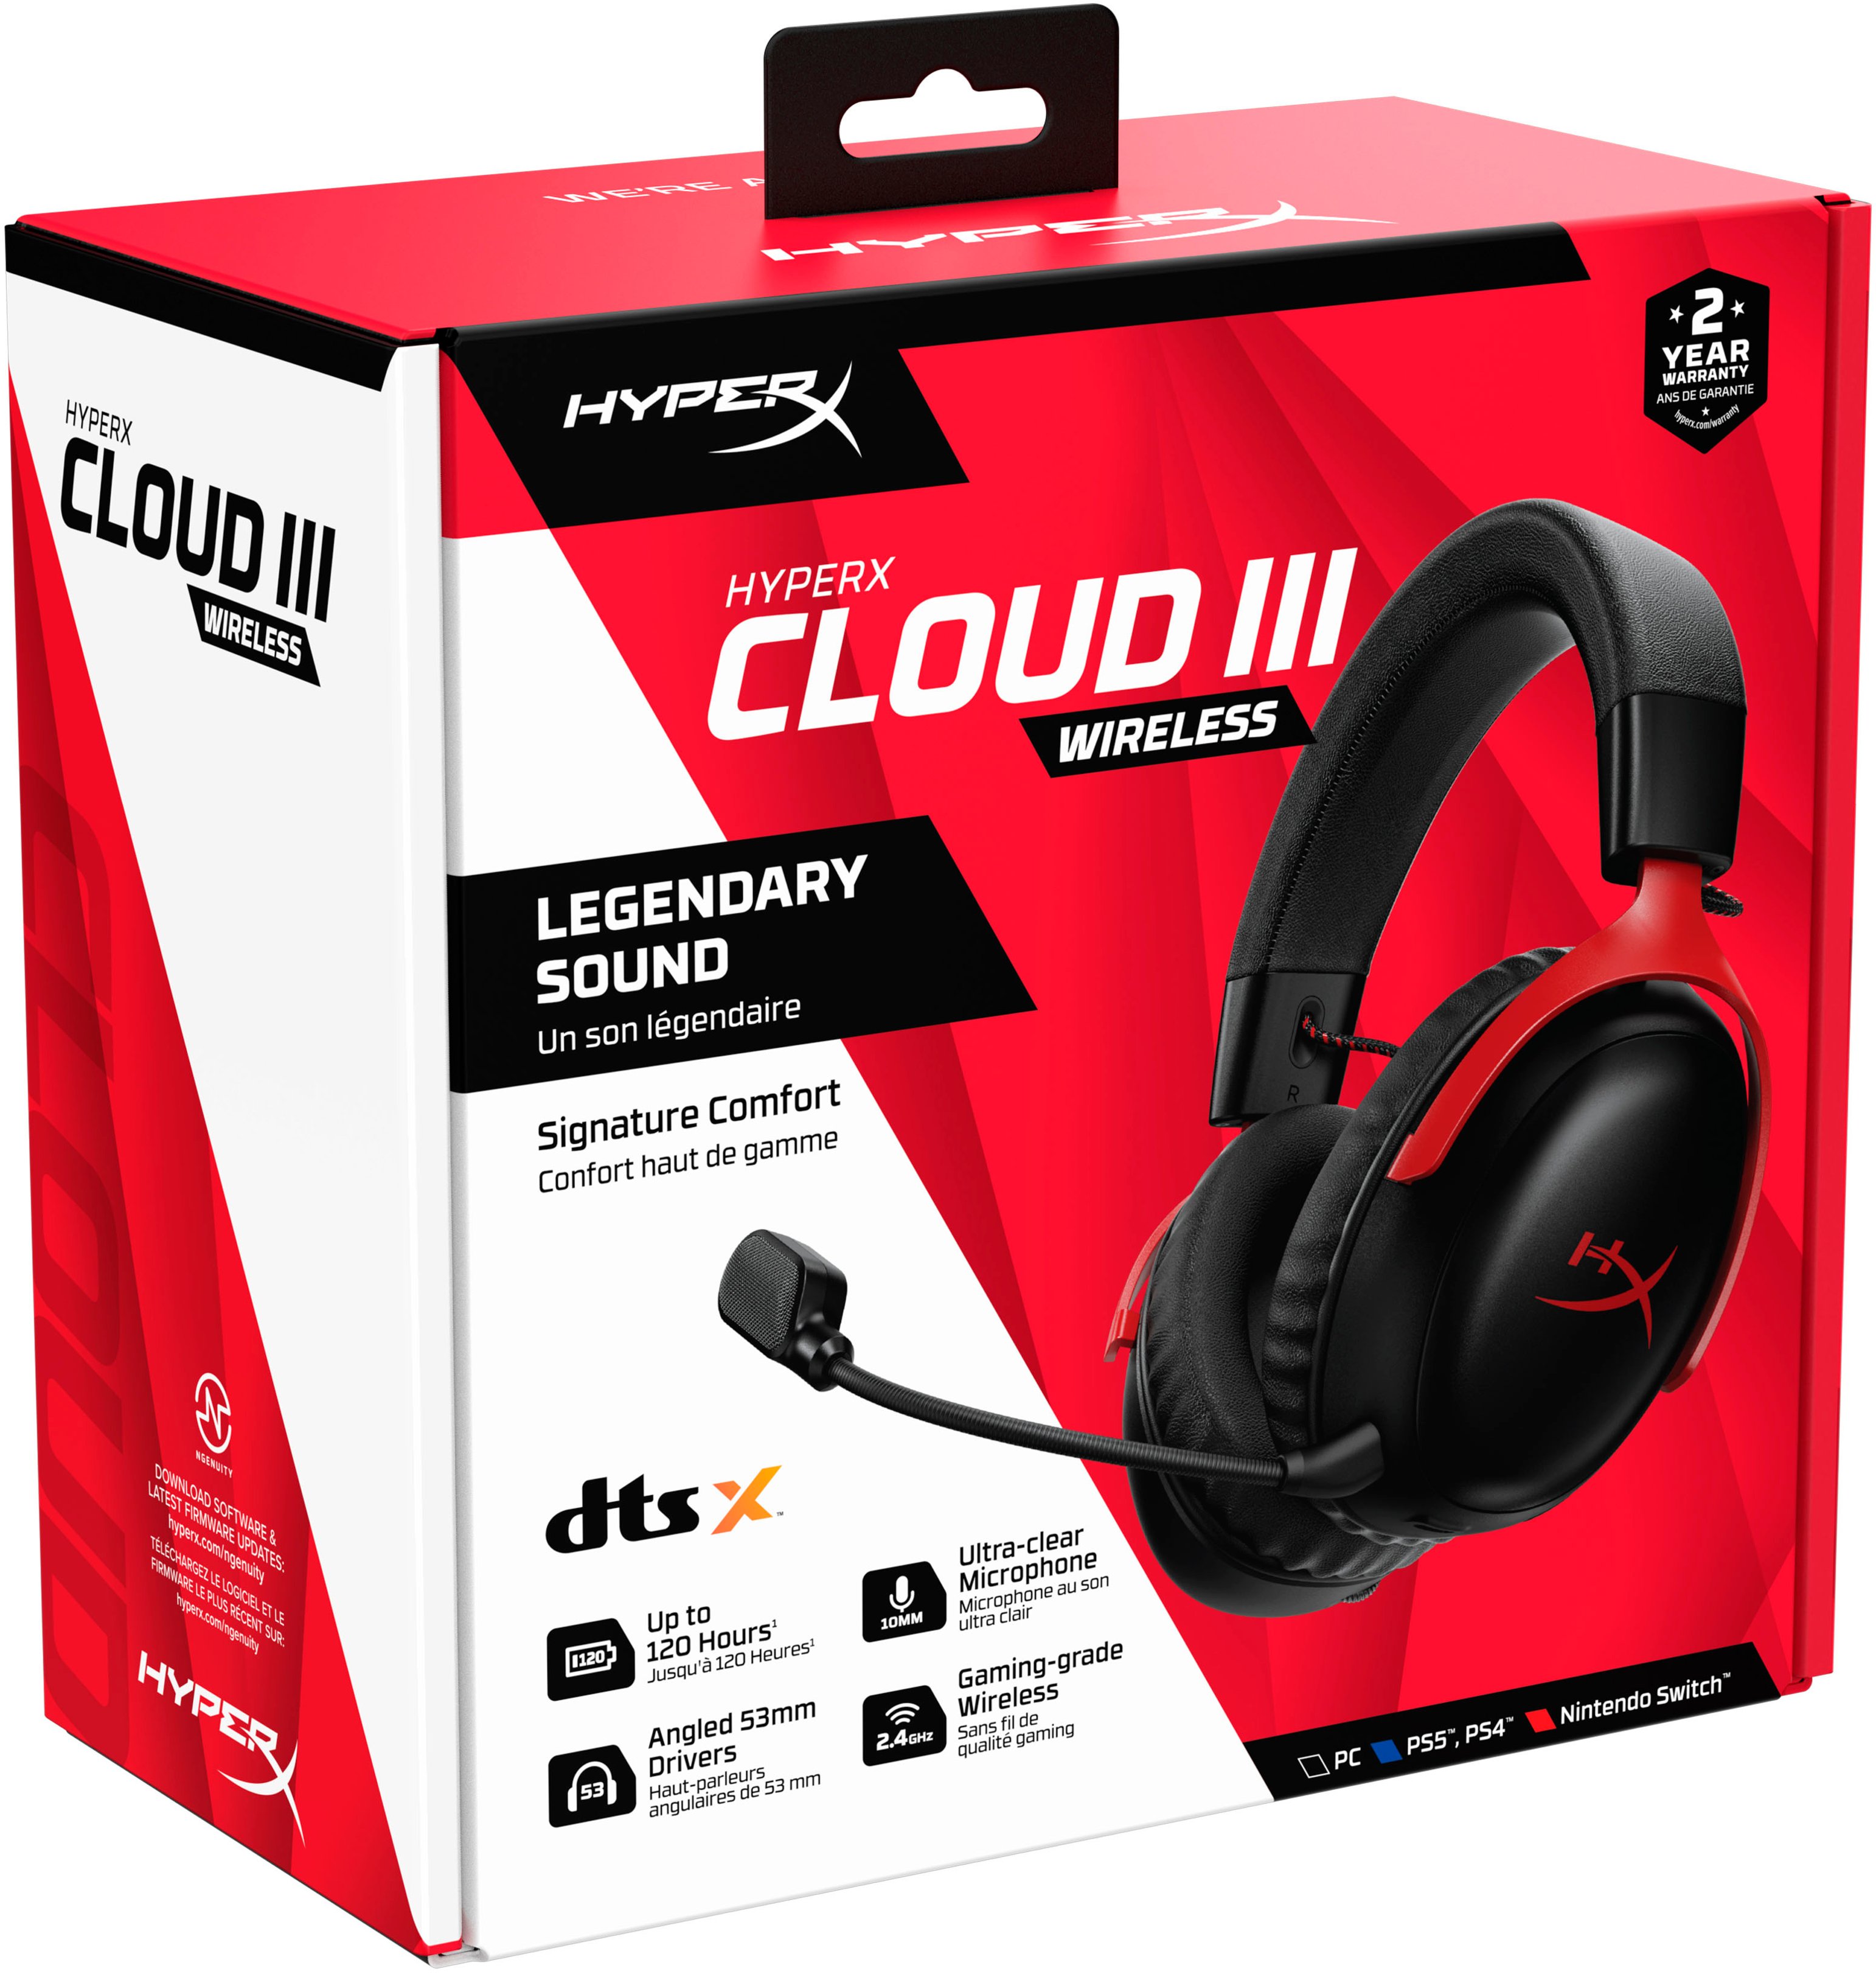 HyperX Cloud III Wireless Gaming Headset for PC, PS5, PS4, and 